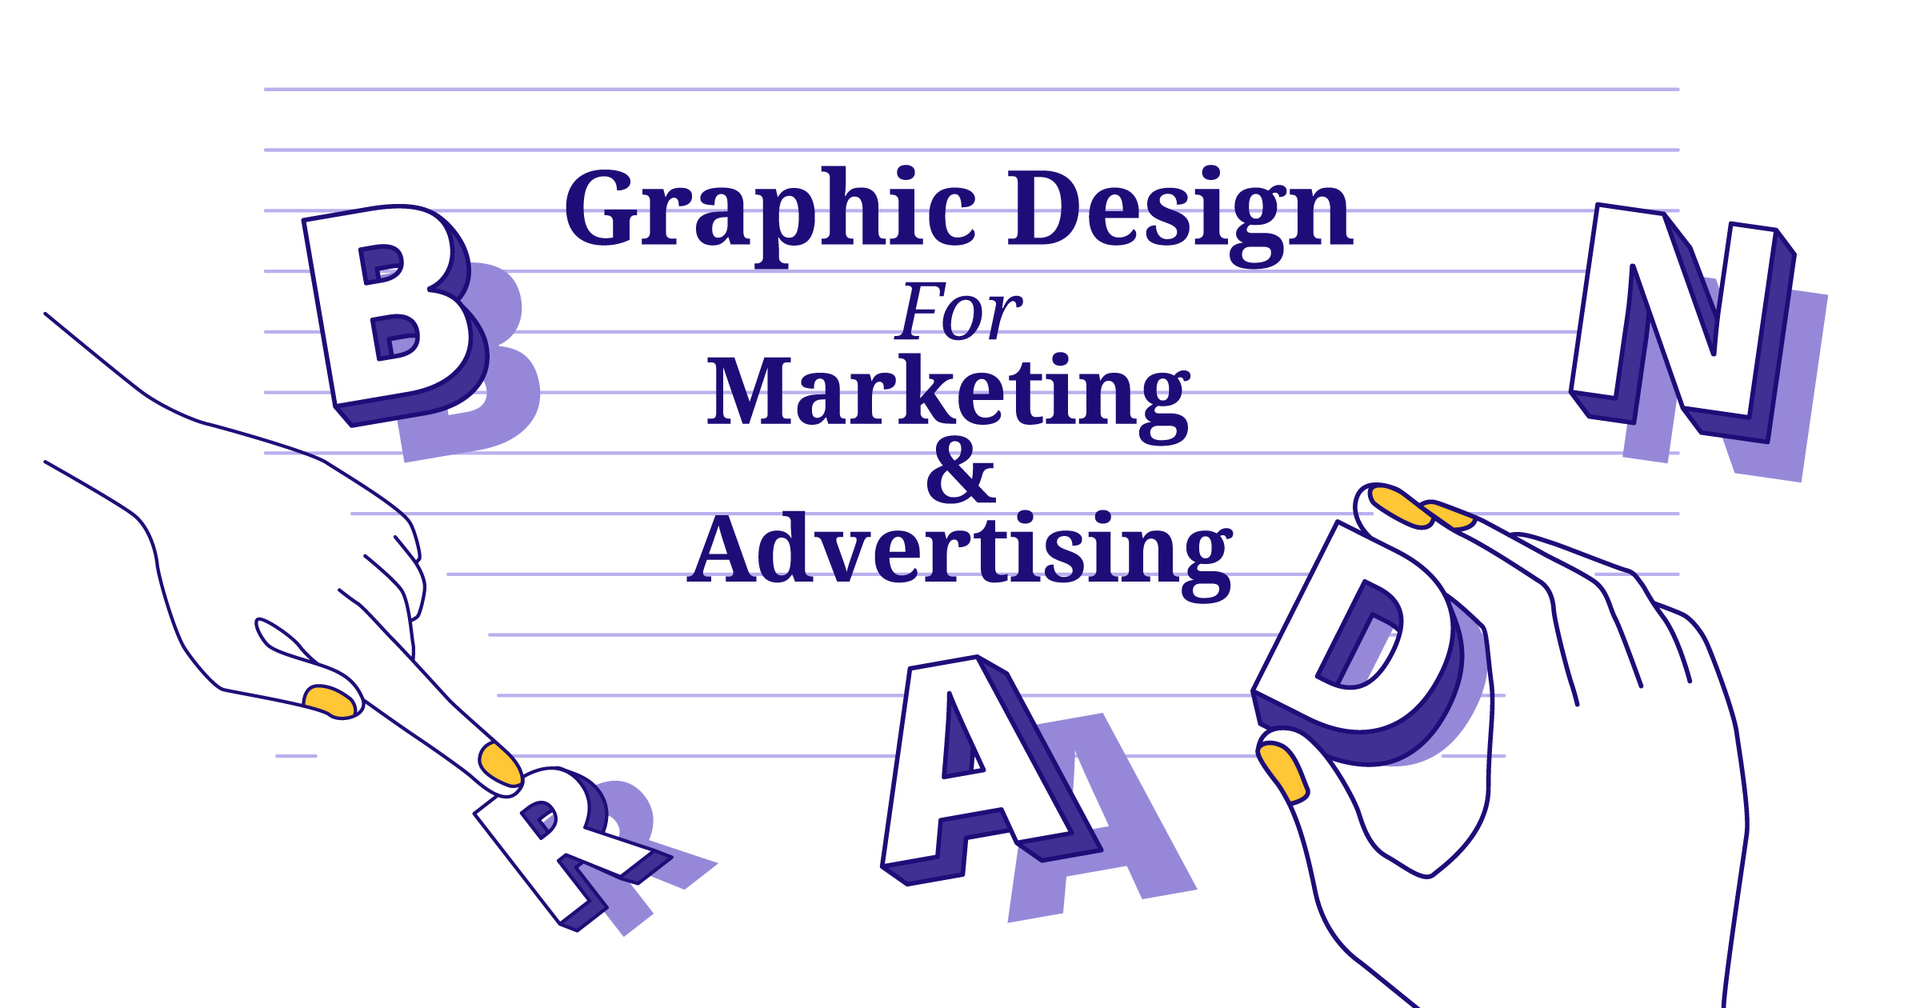 Graphic design for Marketing and advertising